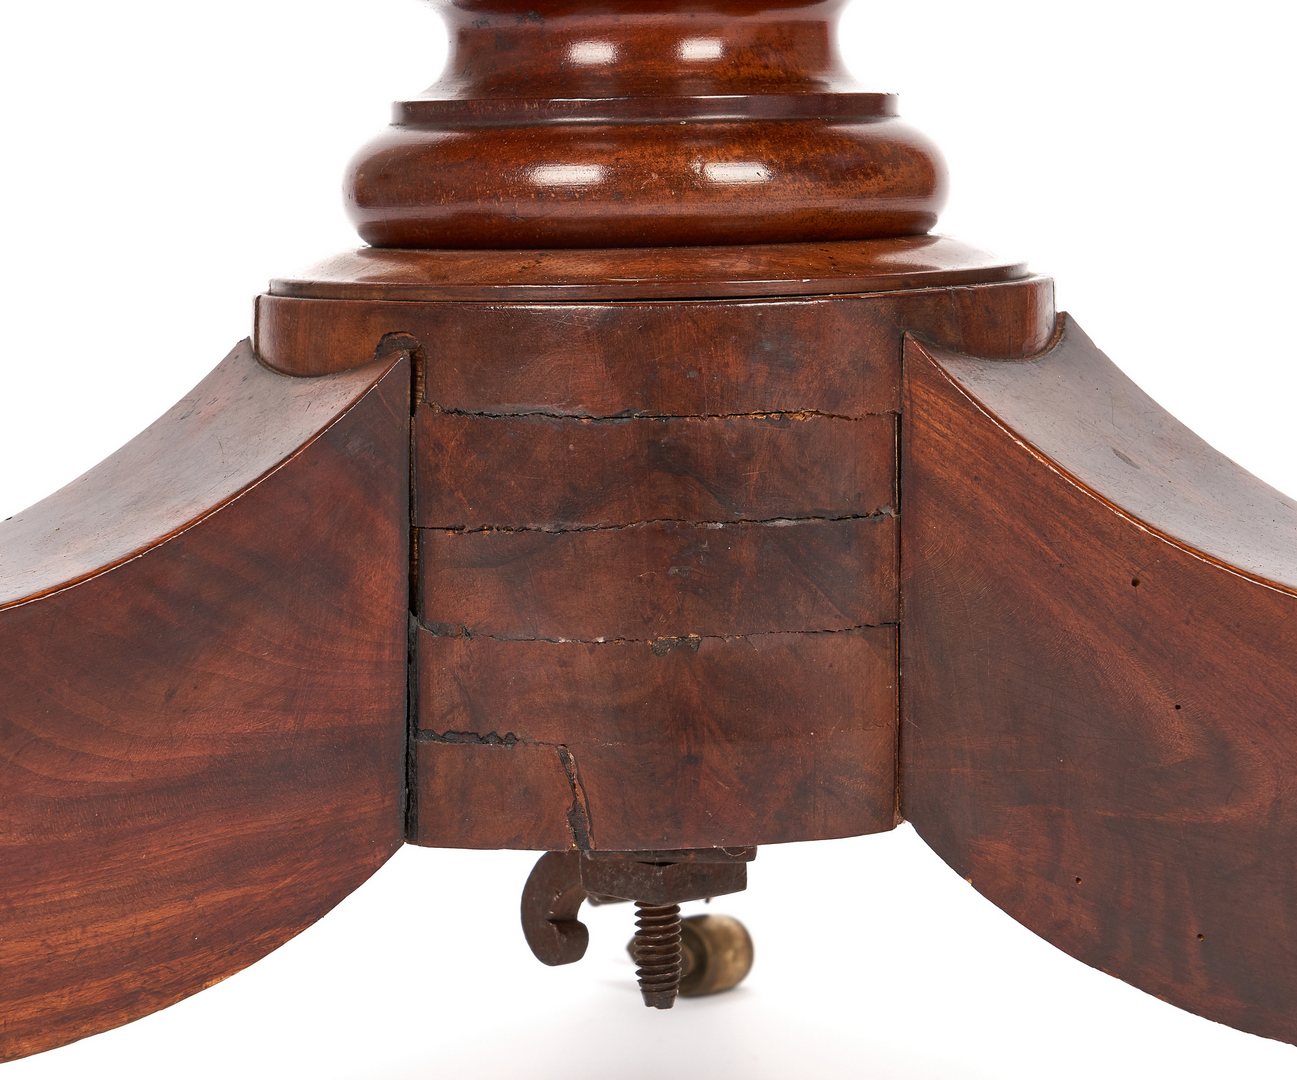 Lot 345: American Classical Center Table